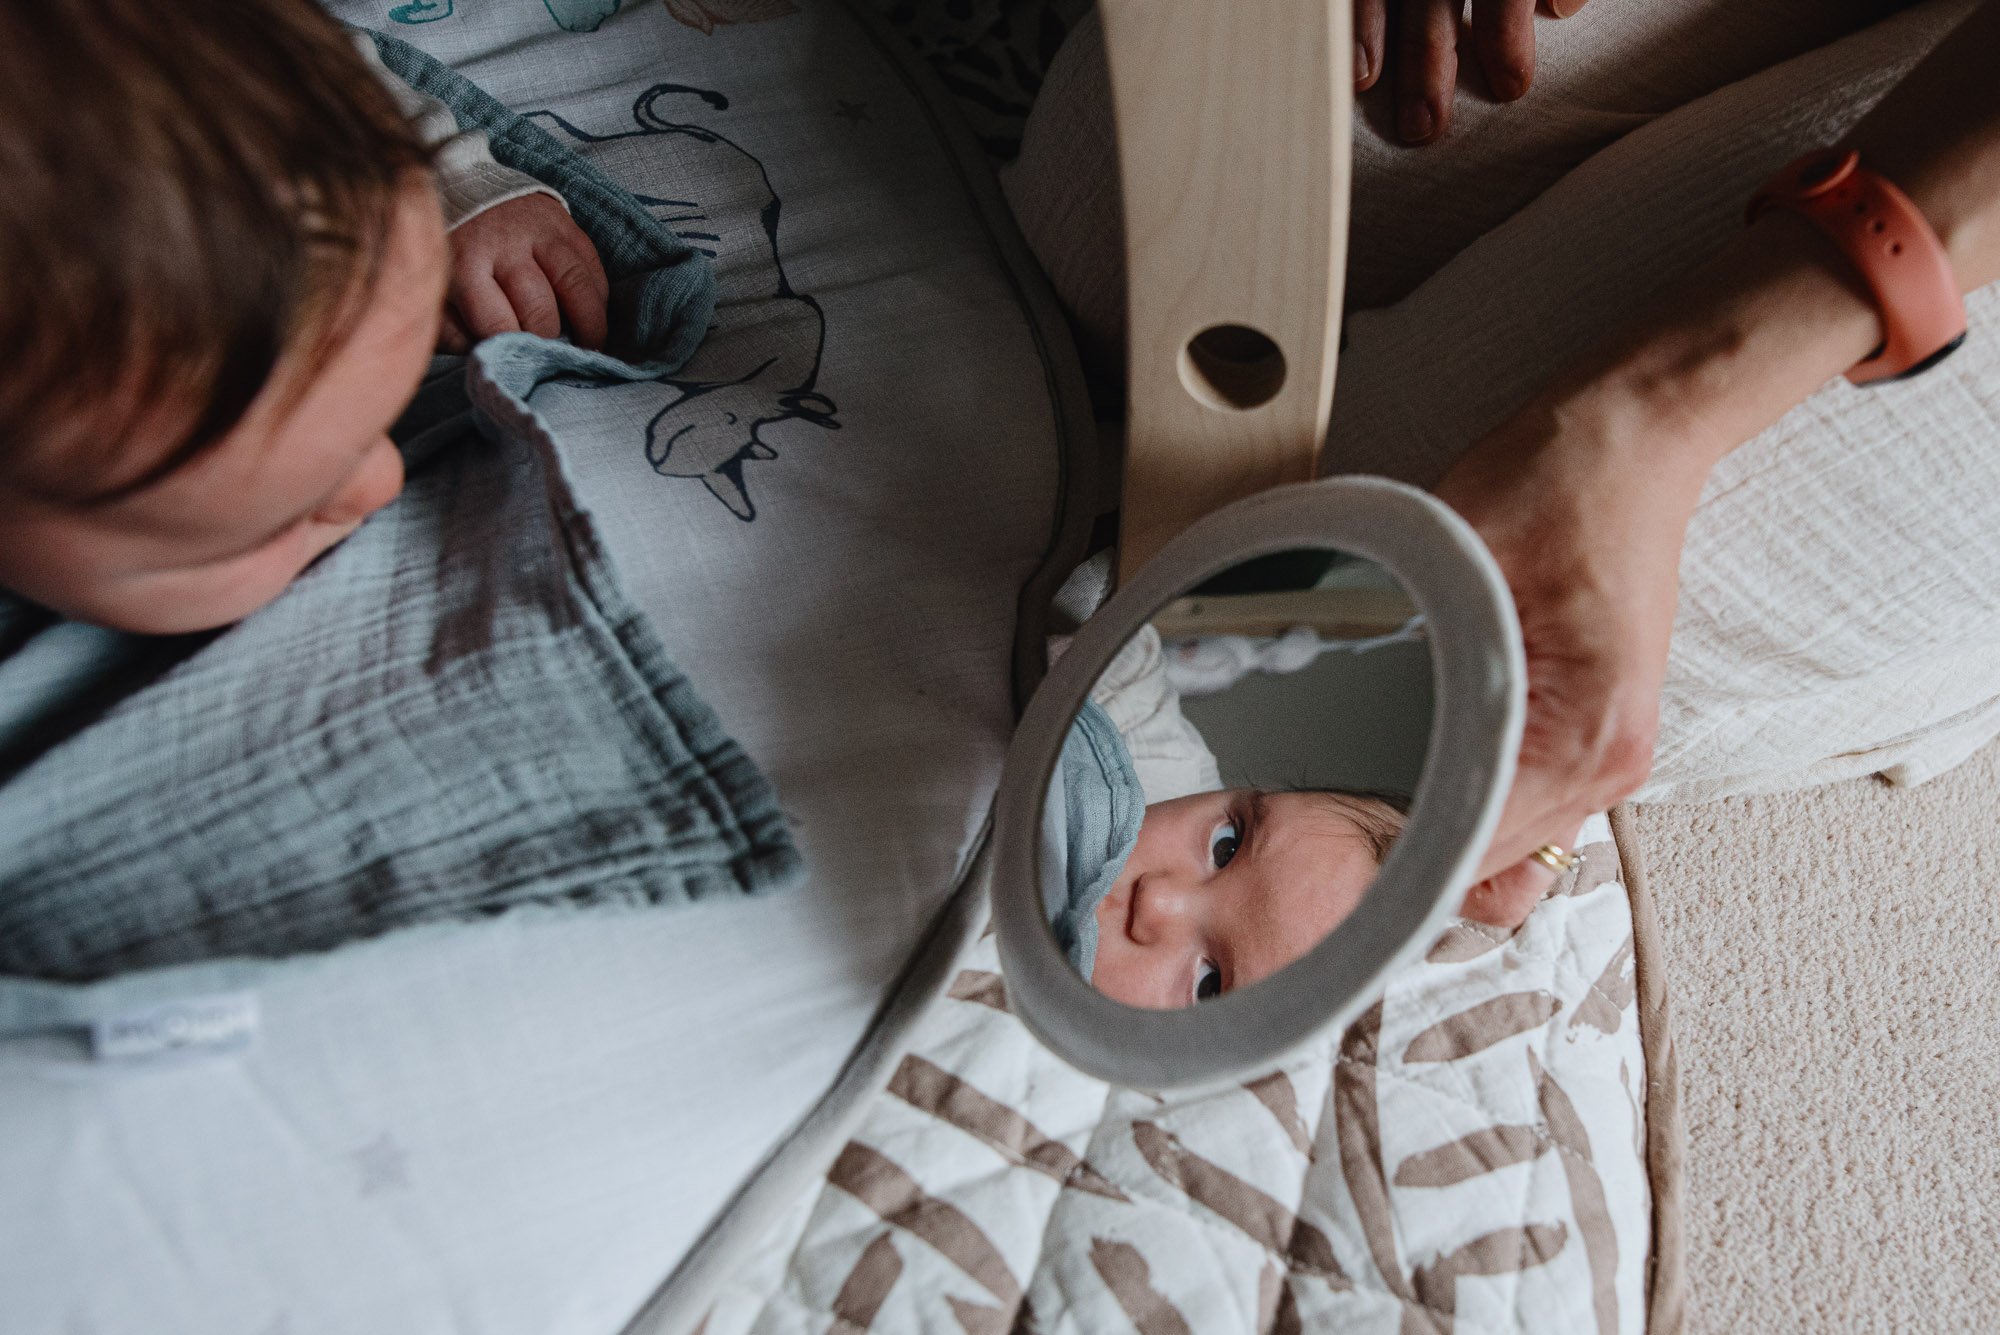 baby-boy-playing-on-play-mat-looking-in-mirror-unposed-natural-newborn-baby-photographer-london.jpg